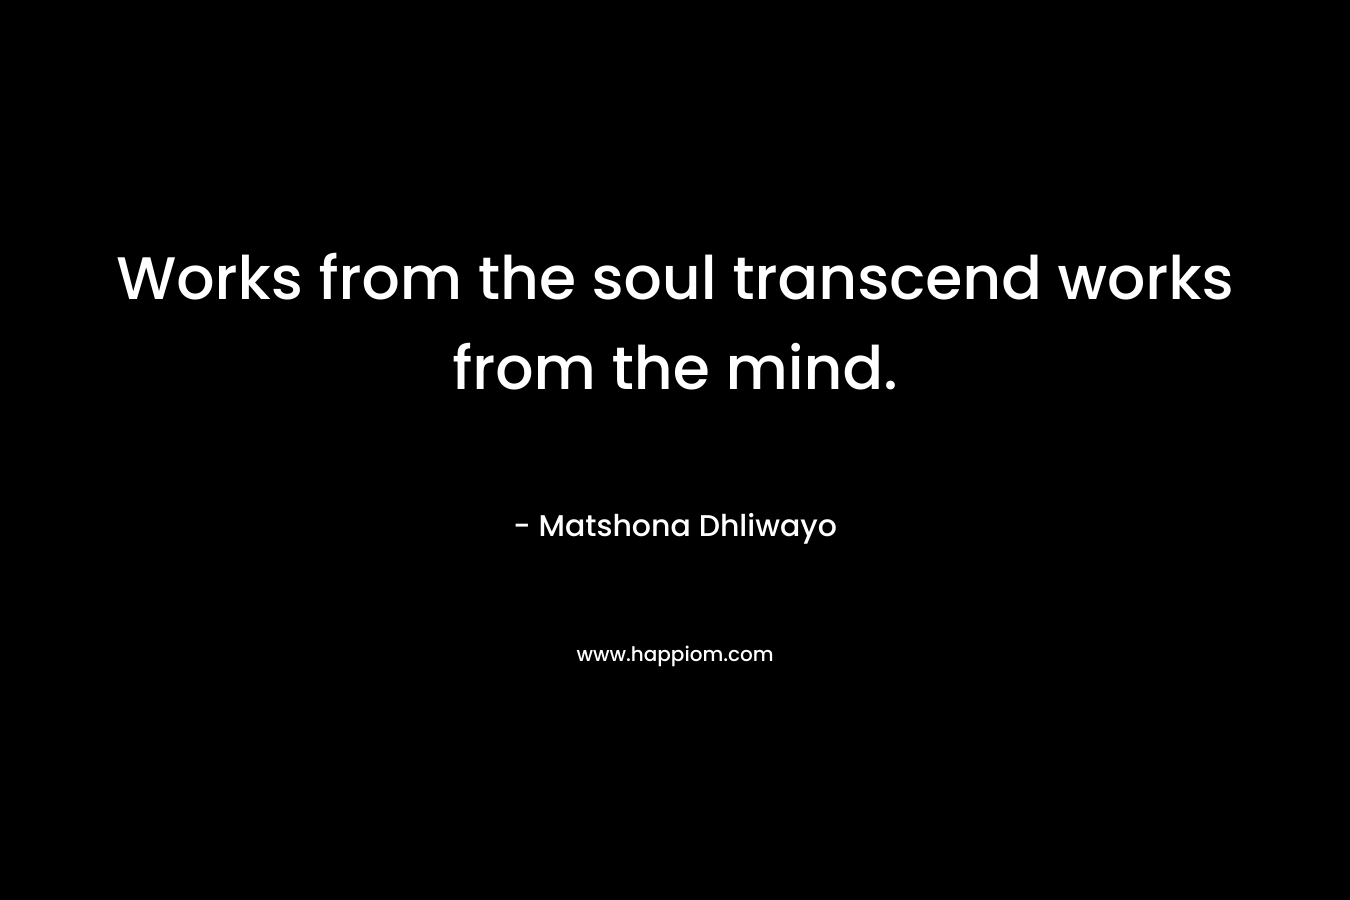 Works from the soul transcend works from the mind. – Matshona Dhliwayo